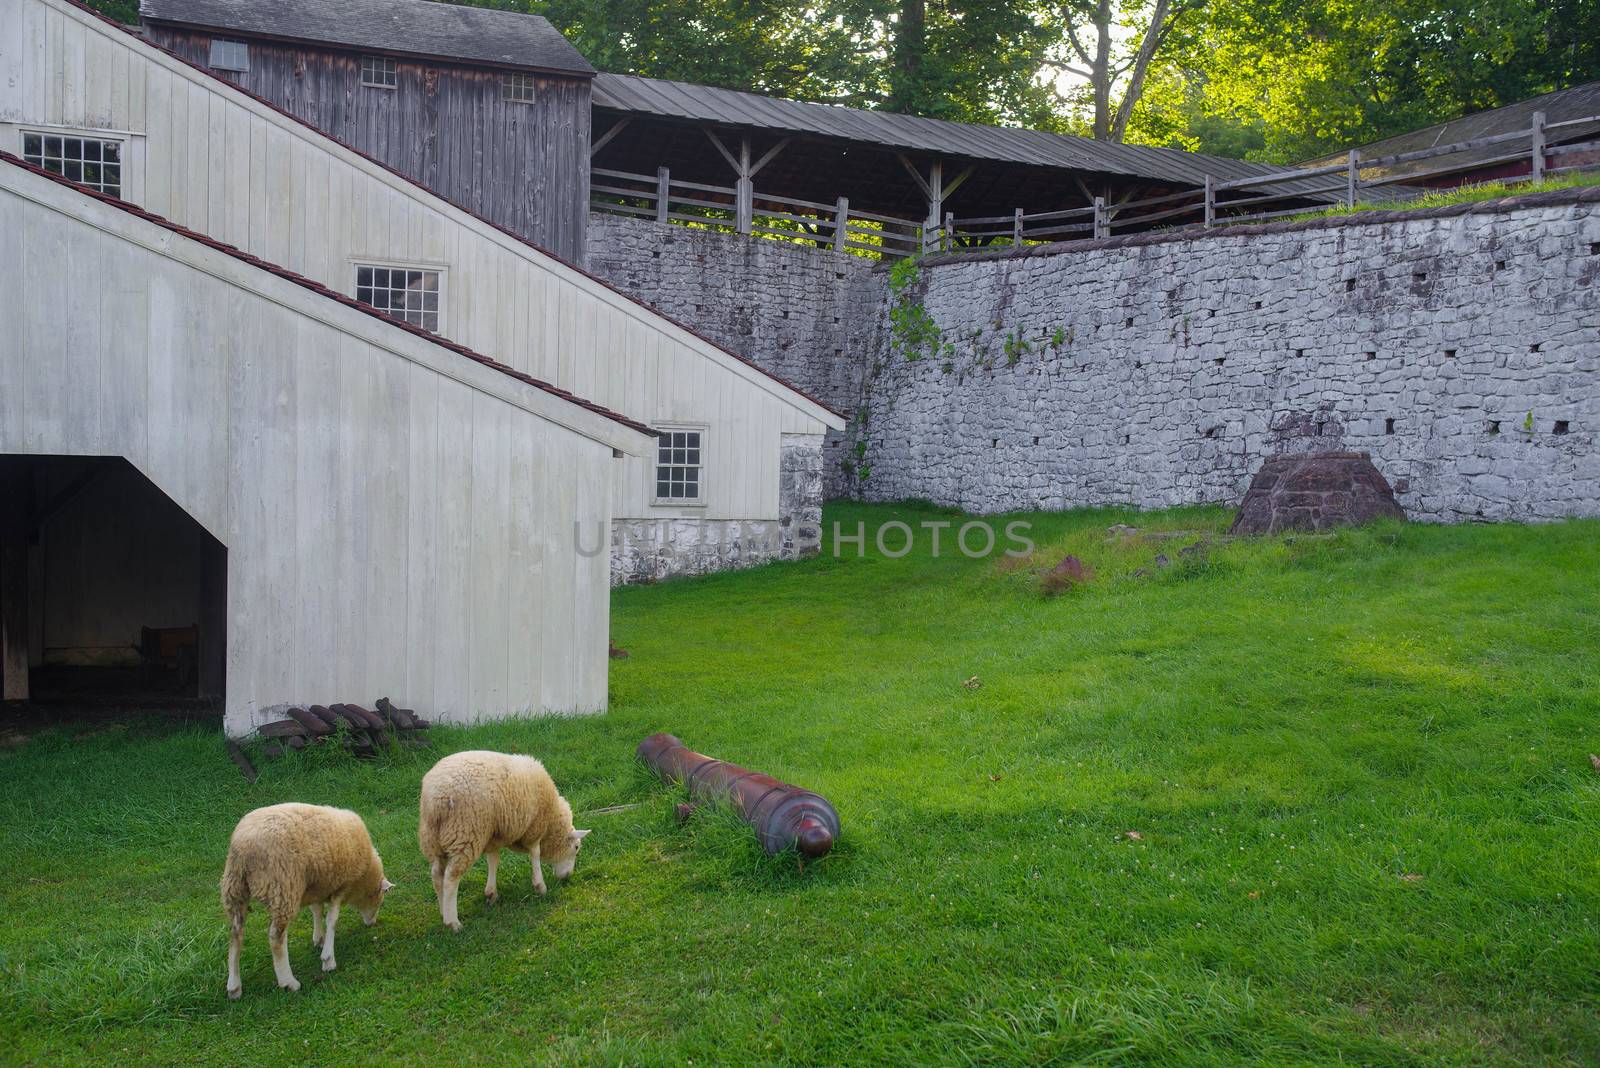 Sheep grazing around a cannon at the Hopewell Furnace National Historic Site in Pennsylvania. Stone wall and whitewashed wood buildings.